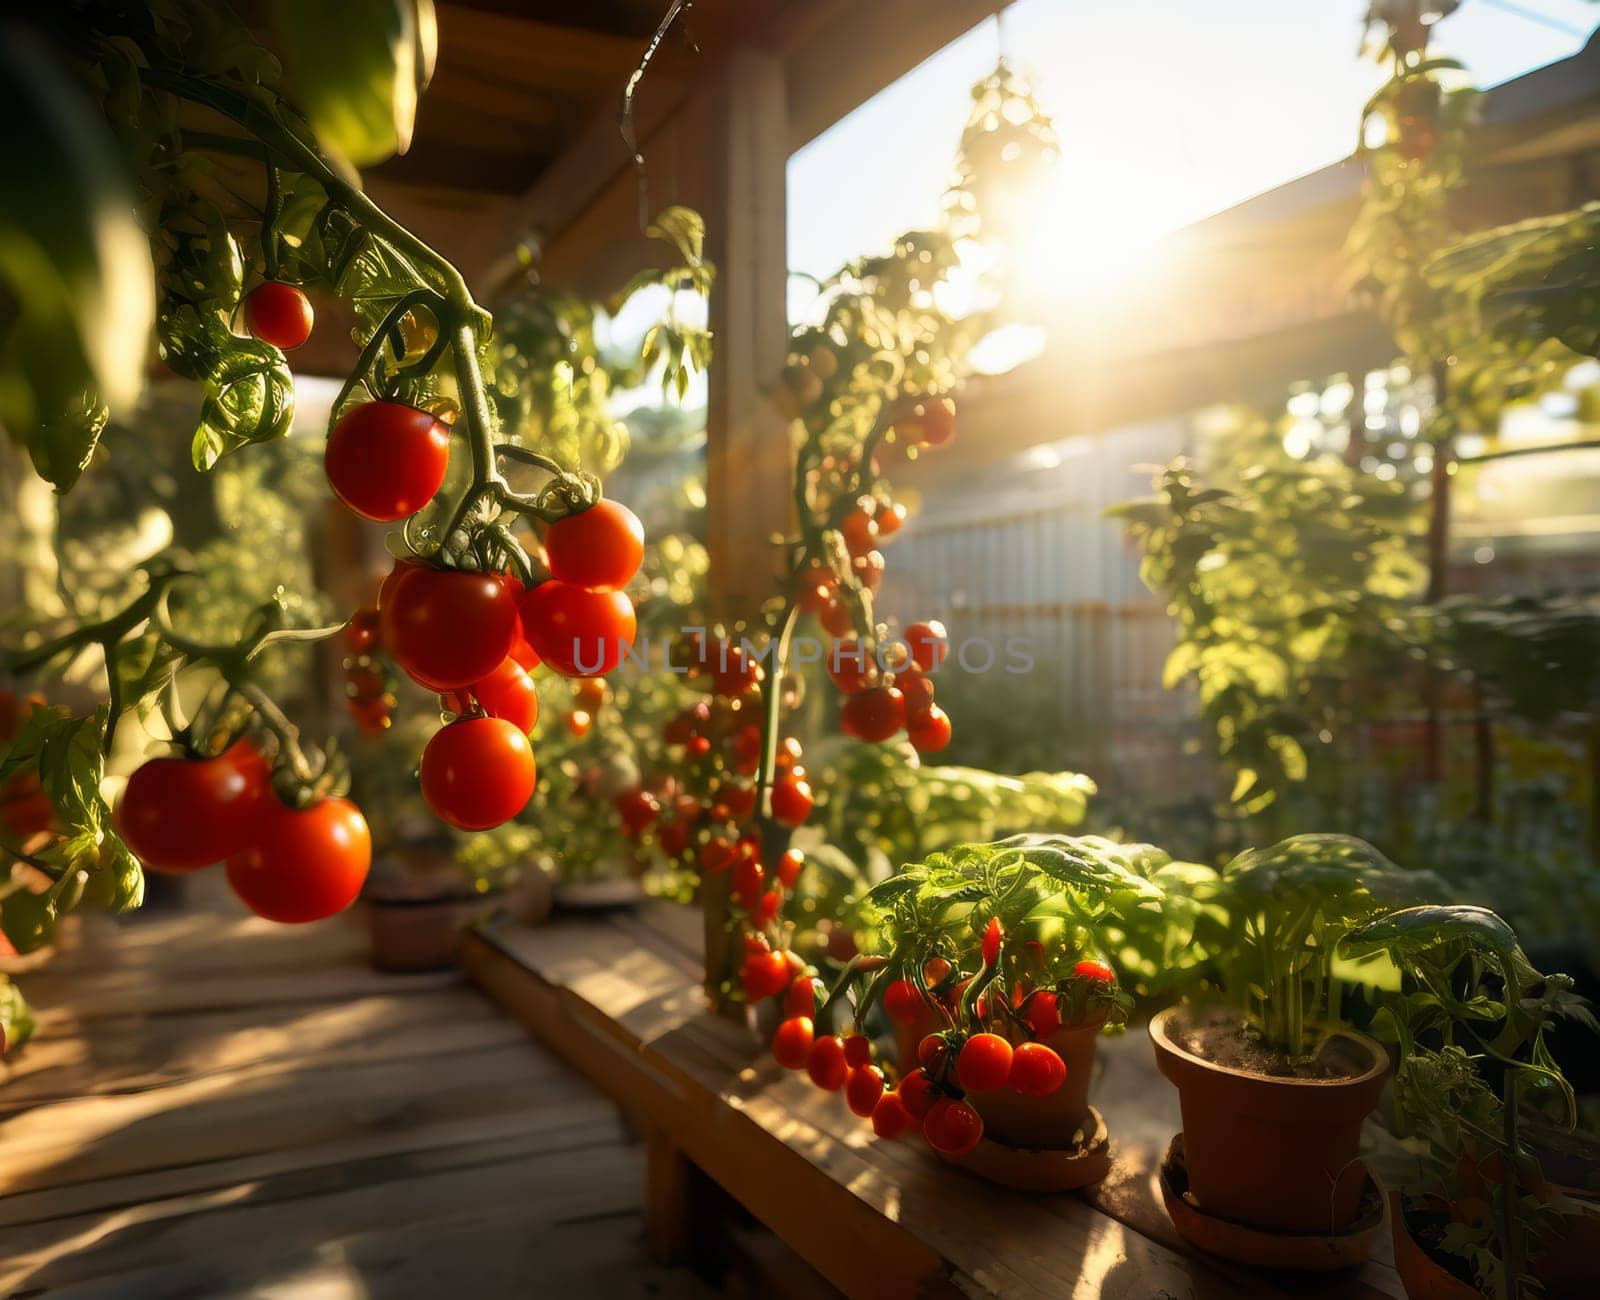 Balcony garden with cherry tomatoes by fascinadora